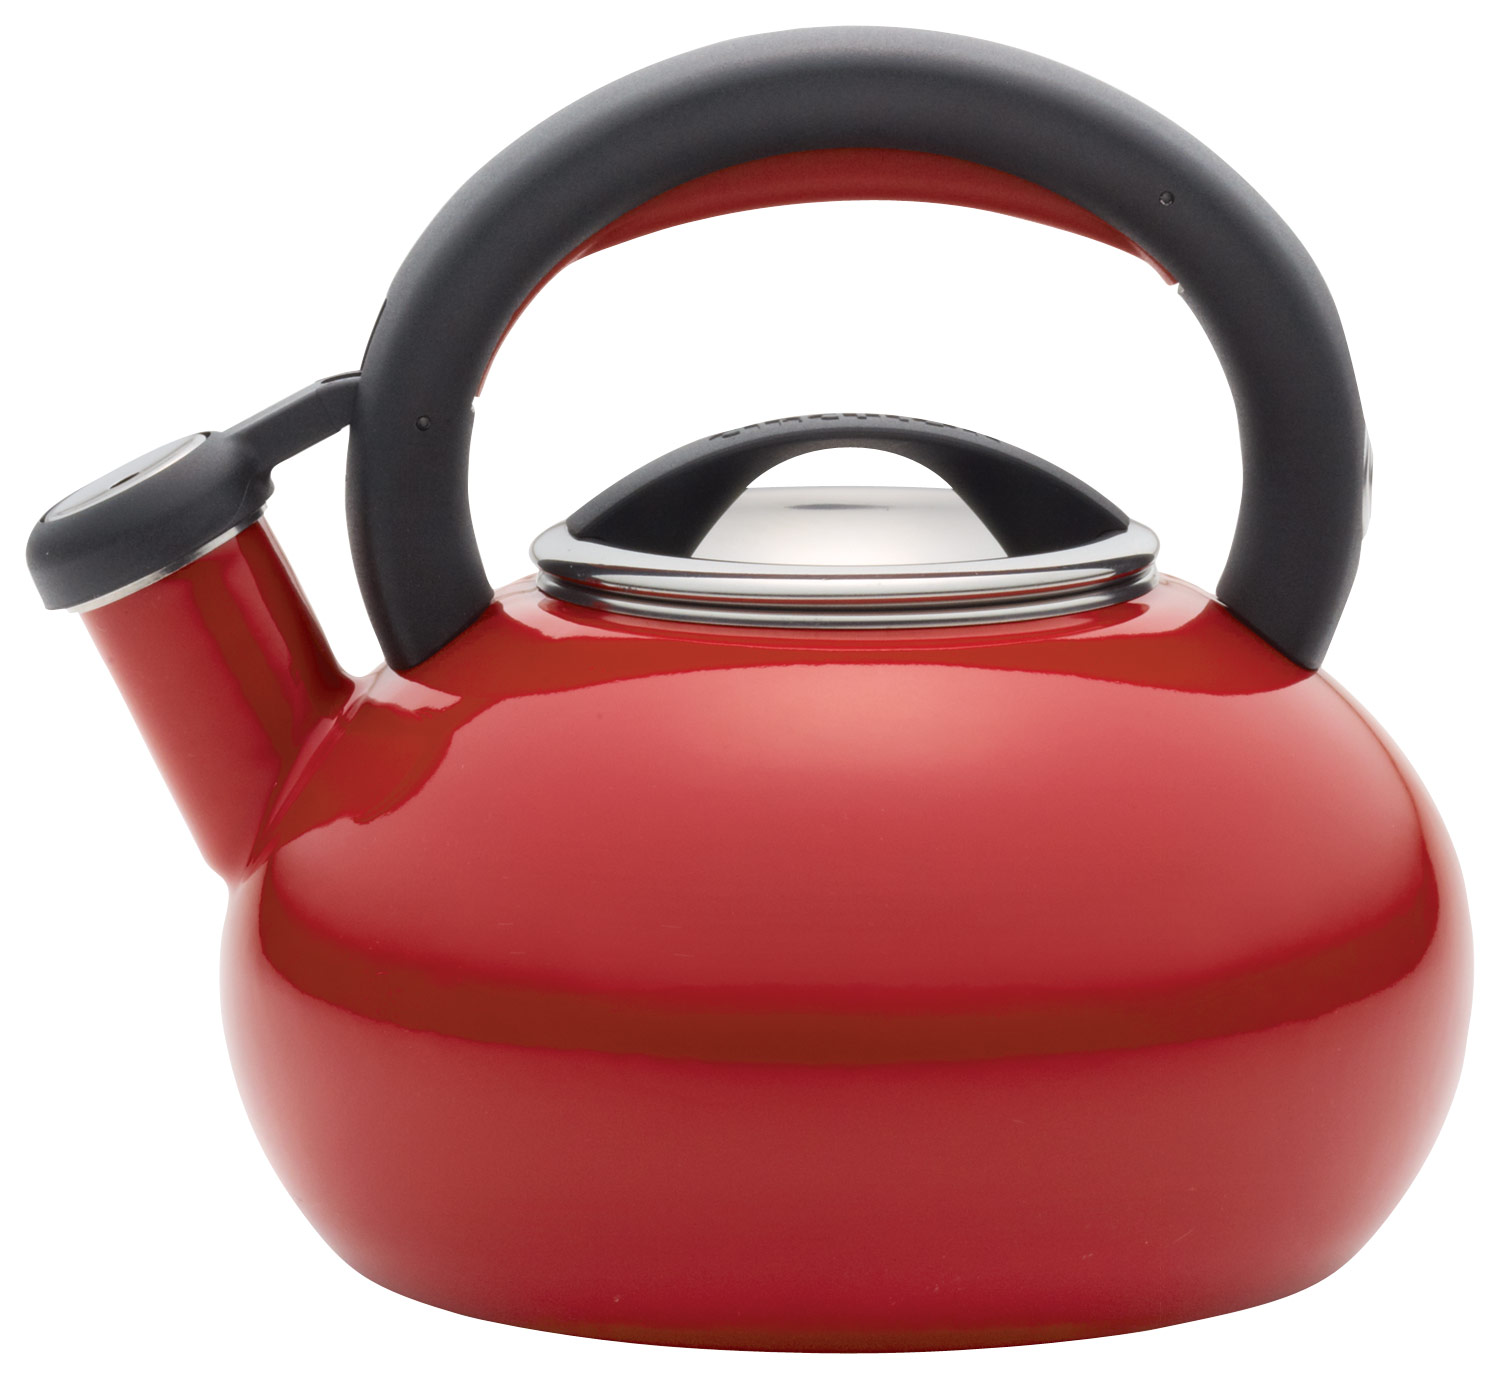 Circulon 8-Cup Enamel on Steel Induction Stovetop Teakettle with